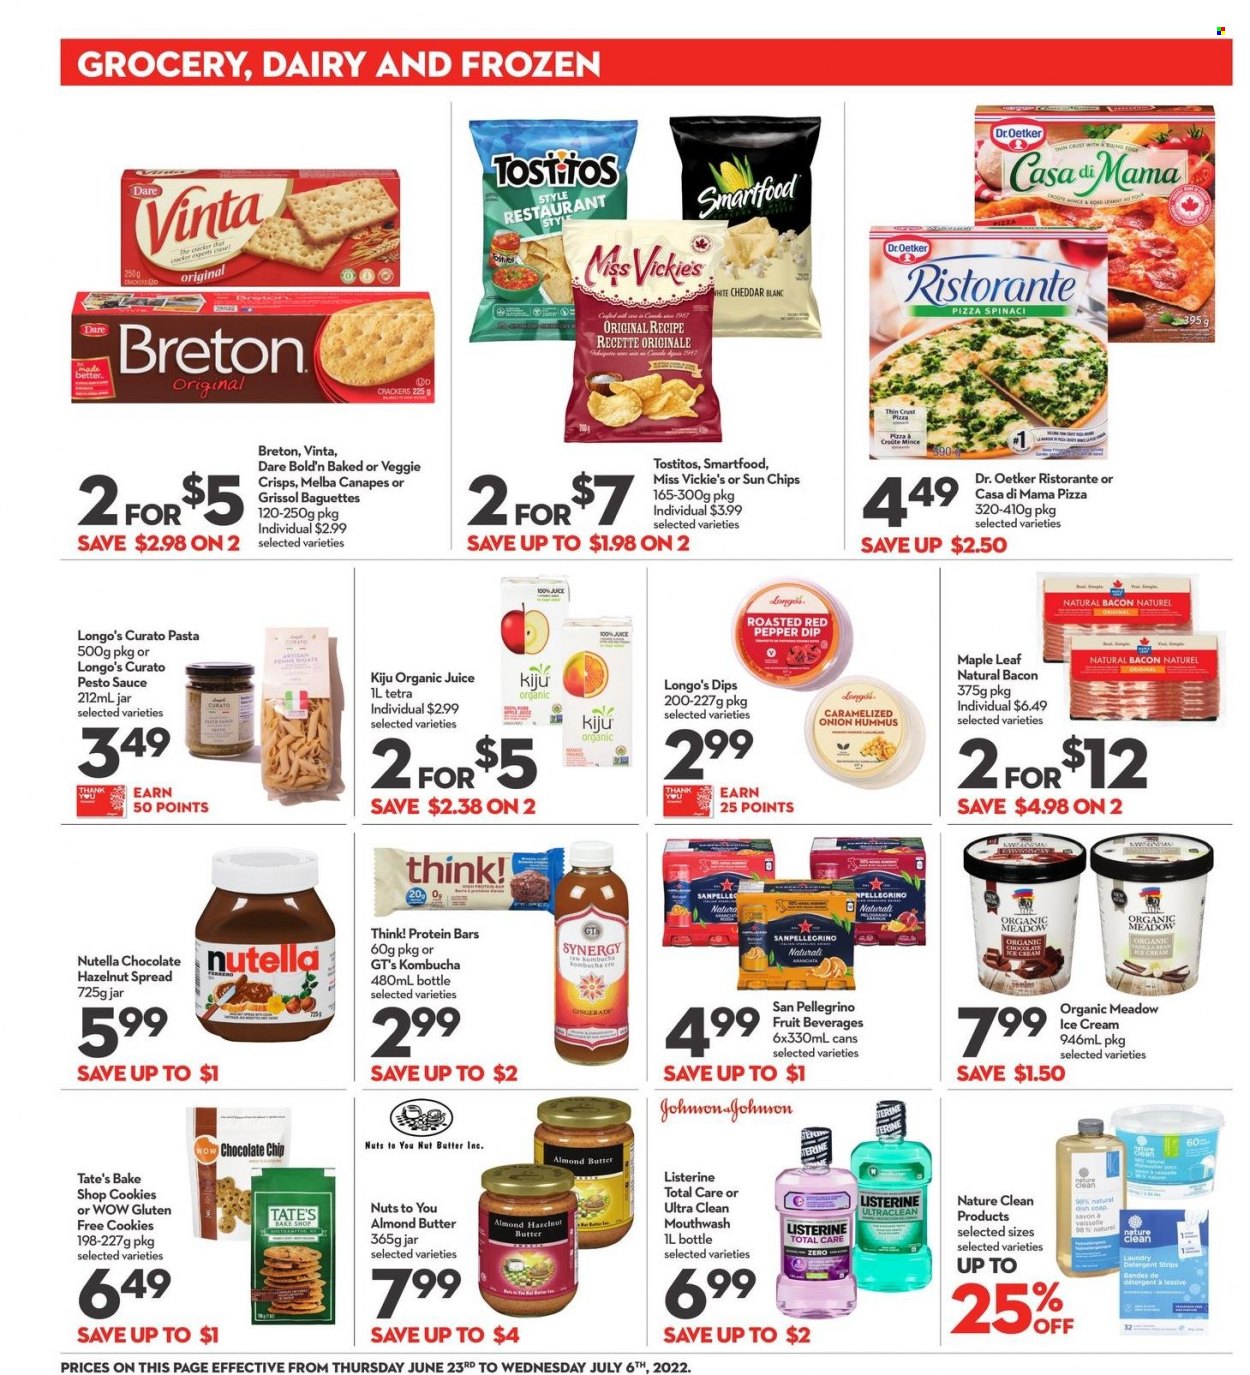 thumbnail - Longo's Flyer - June 23, 2022 - July 06, 2022 - Sales products - onion, pizza, pasta, sauce, bacon, hummus, Dr. Oetker, almond butter, ice cream, strips, cookies, crackers, Smartfood, Tostitos, protein bar, nut butter, hazelnut spread, juice, San Pellegrino, kombucha, Johnson's, laundry detergent, soap, mouthwash, baguette, detergent, Listerine, pesto, Nutella. Page 13.